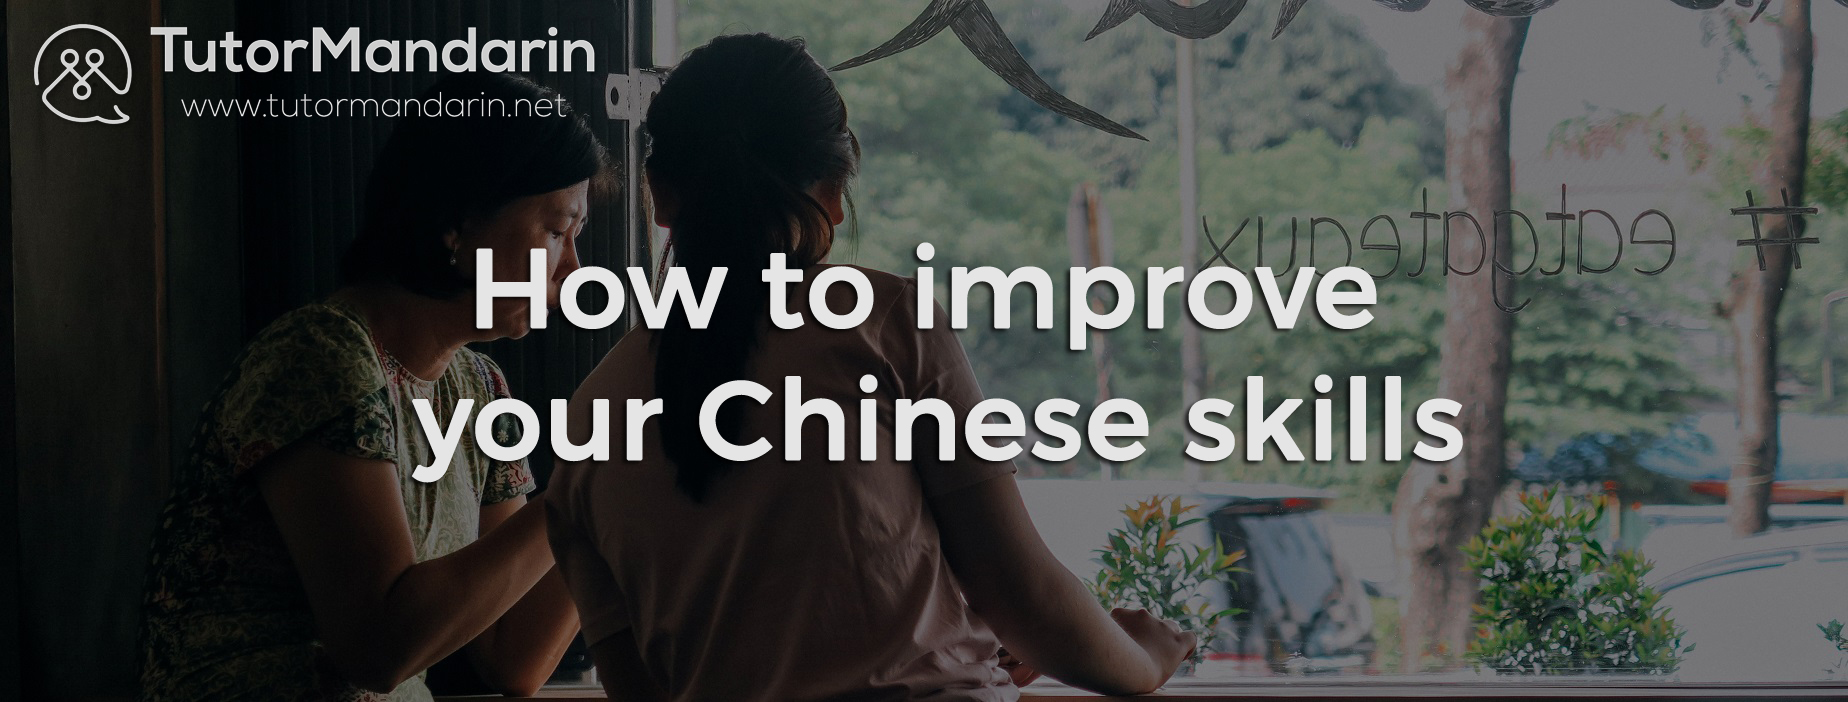 how to improve Chinese